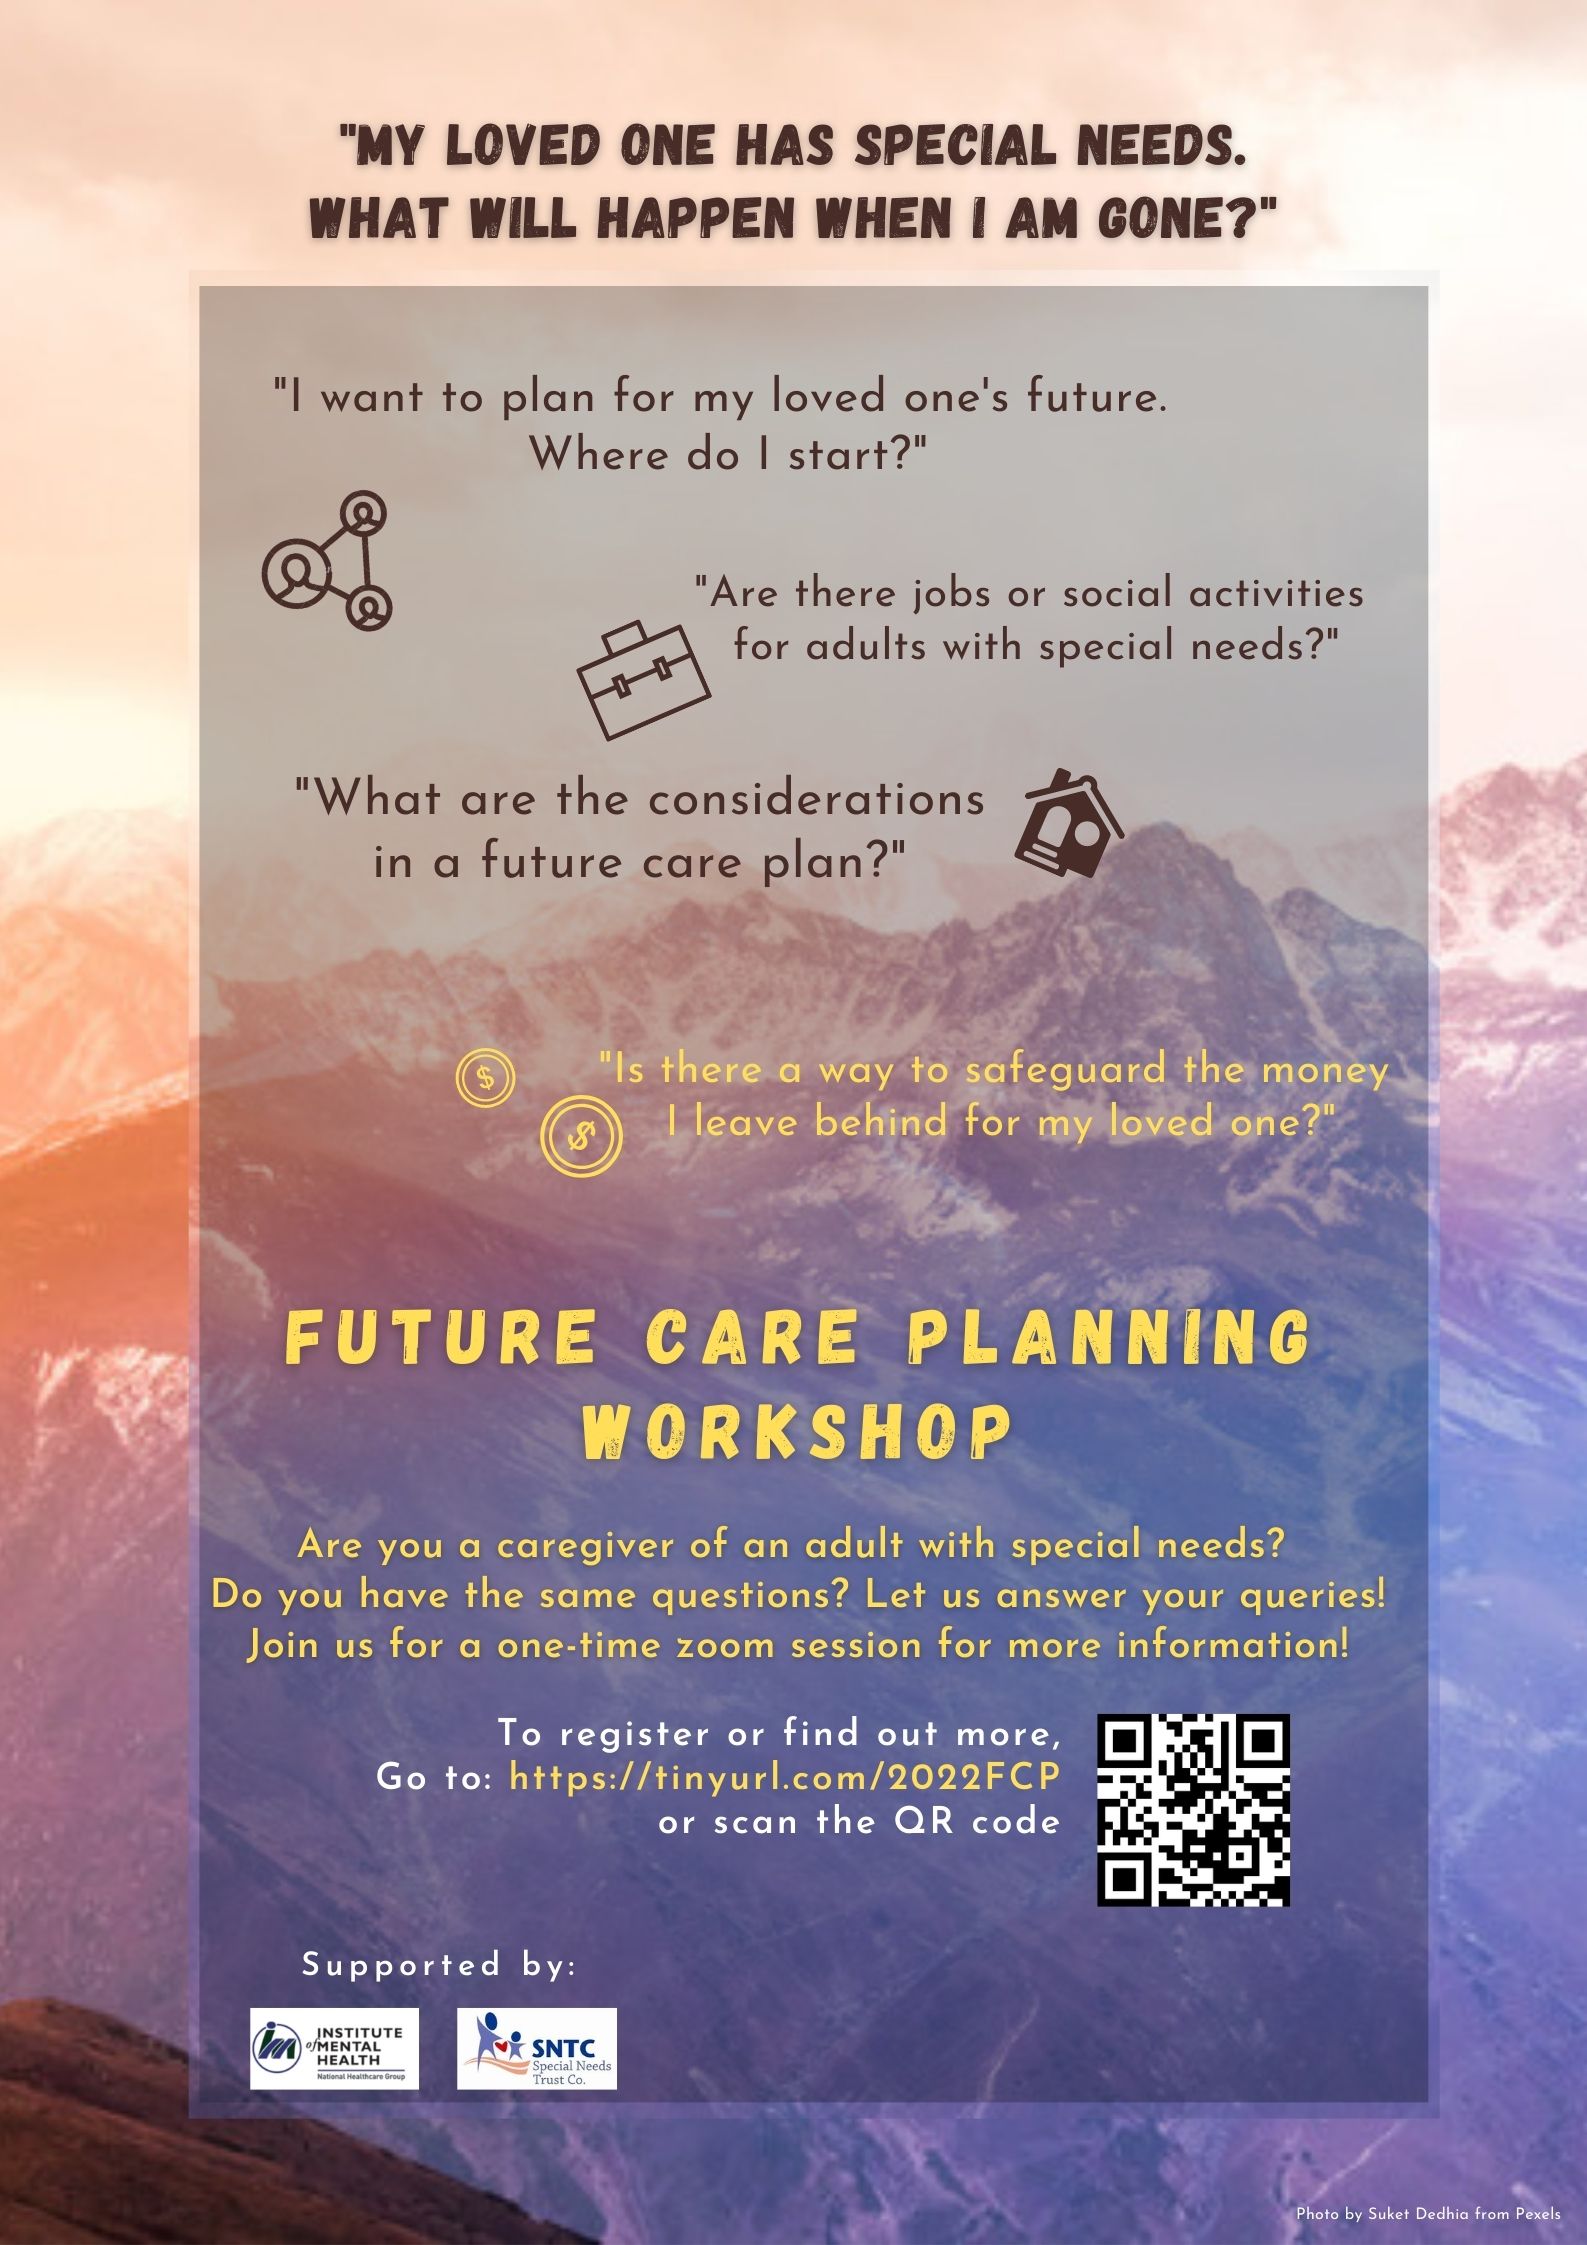 IMH-SNTC Future Care Planning Workshop (Jun 2022) Chinese